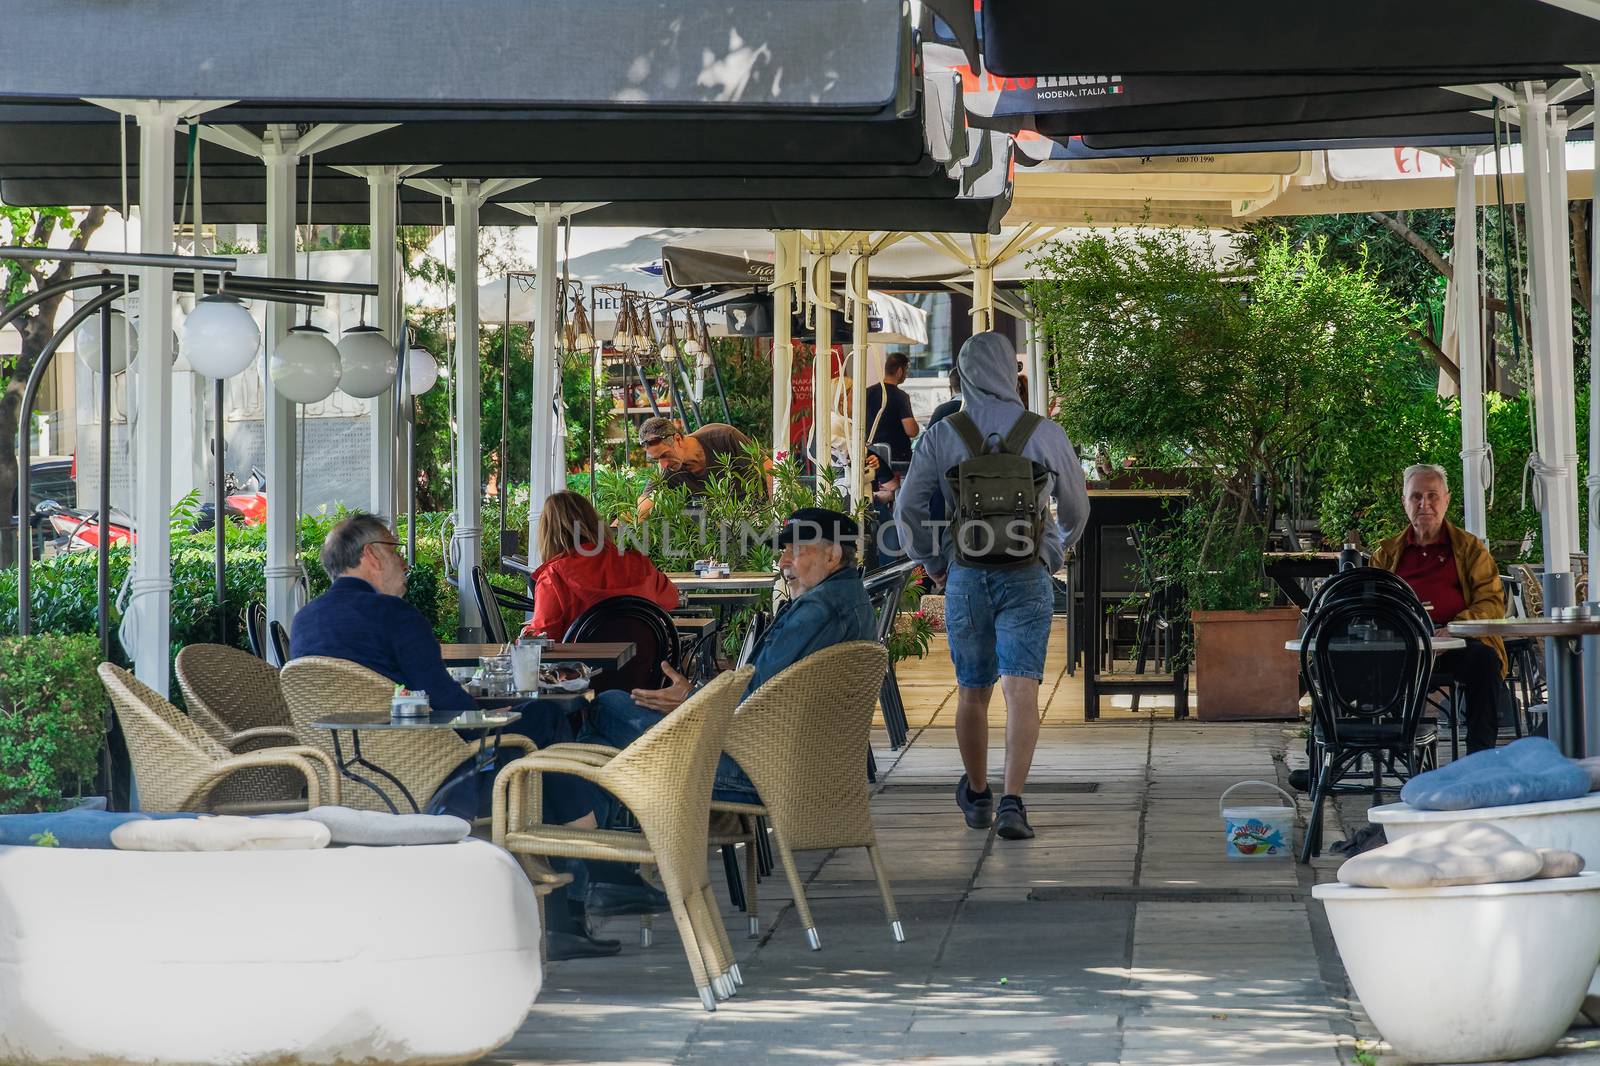 Crowd sitting on bar restaurants at the city center, after Hellenic government loosens COVID-19 coronavirus measures.